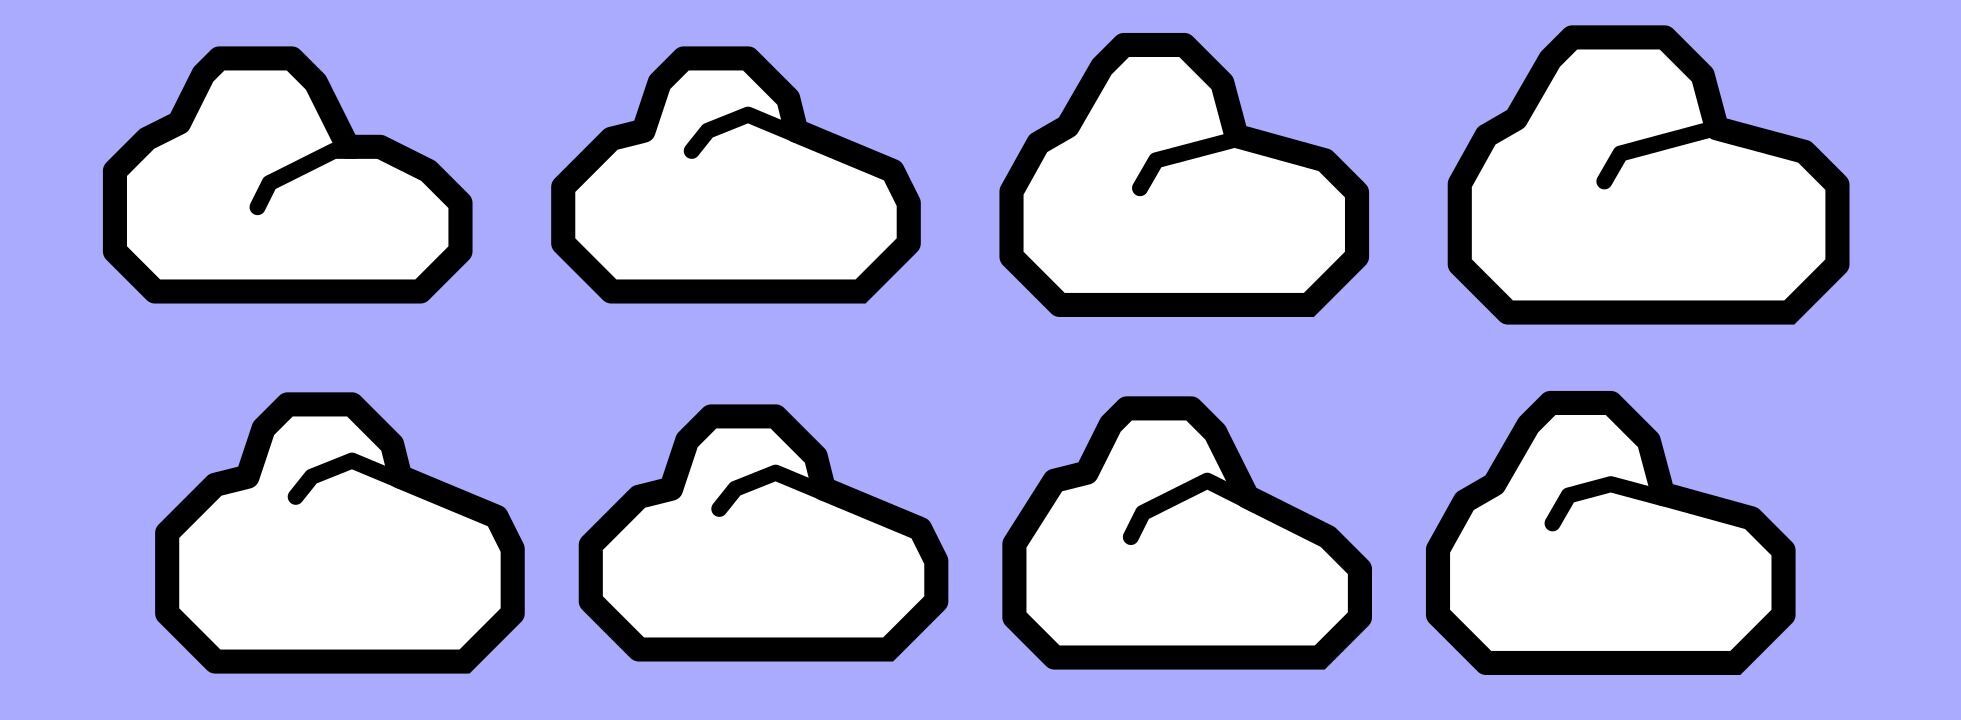 8 variations of the cloud icon